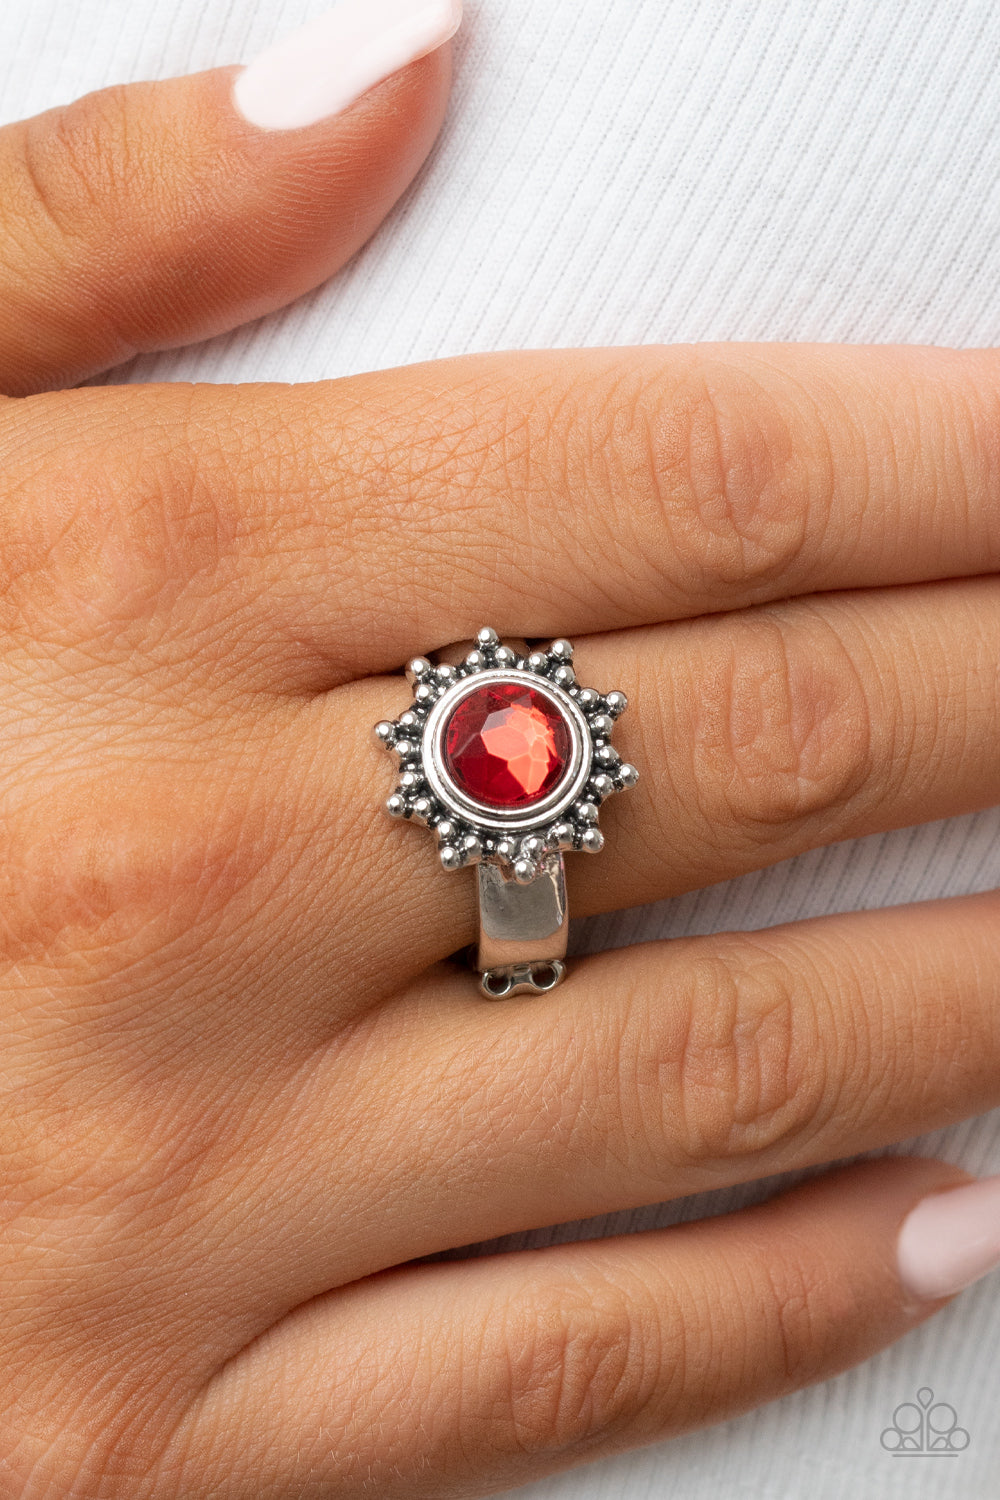 Paparazzi Rings - Expect Sunshine and Reign - Red